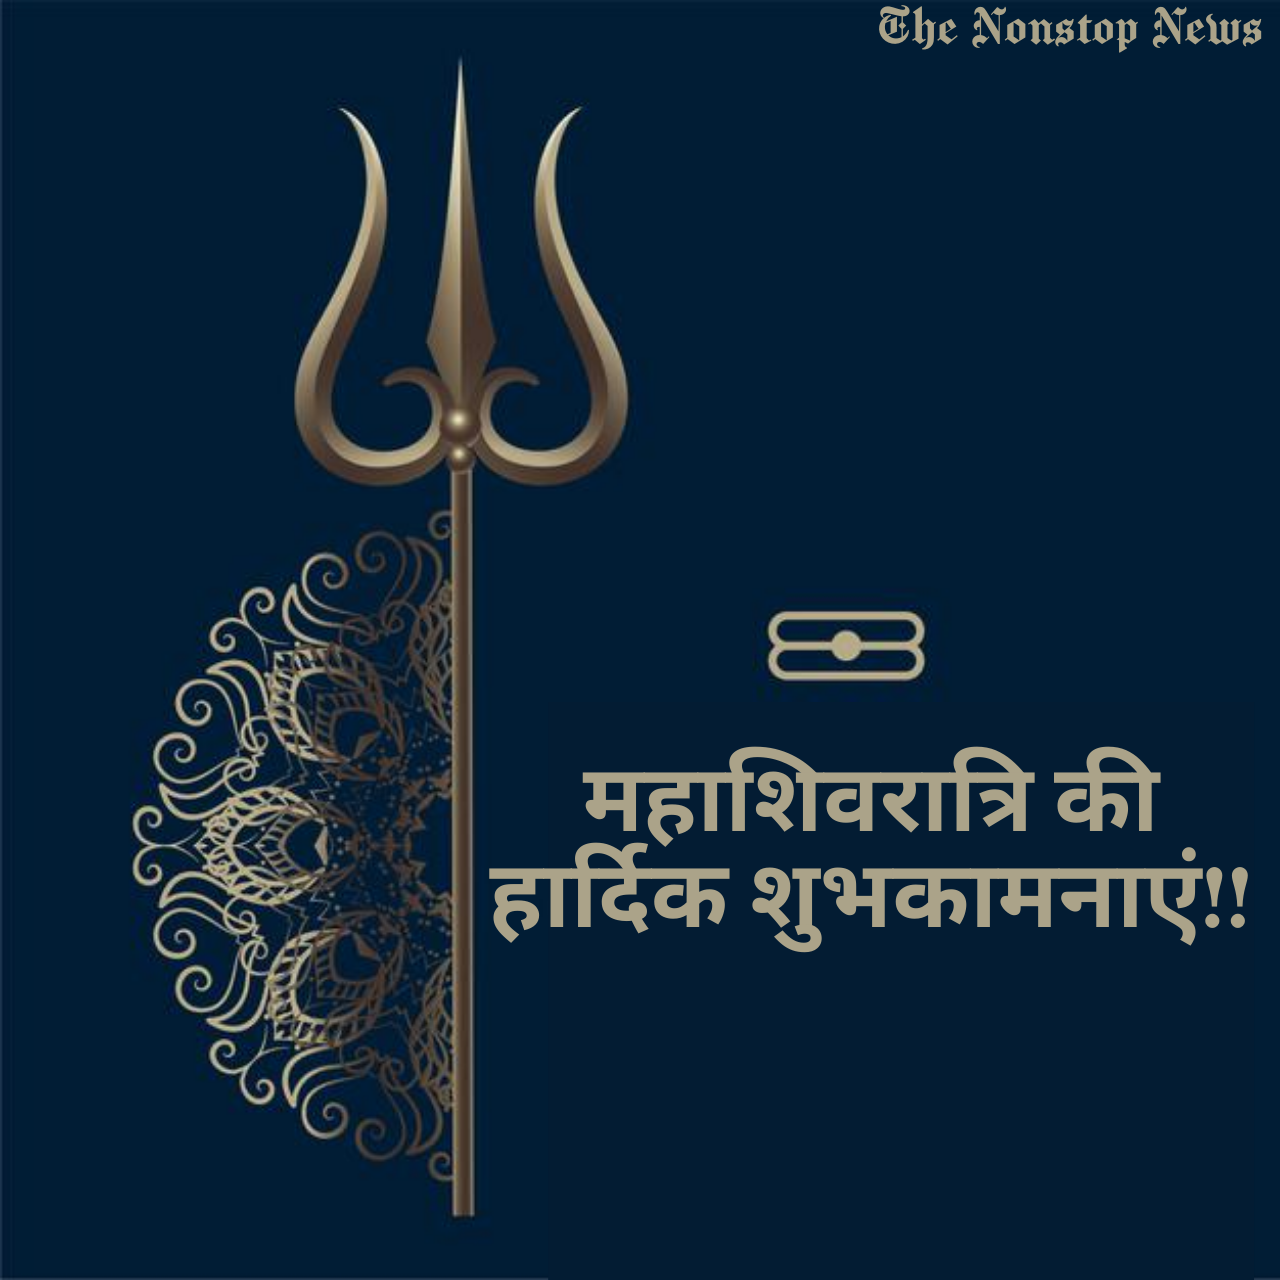 Maha Shivratri 2021 Wishes in Hindi Quotes, Messages, Greetings, and HD Images to Share on Bhola Chaudas